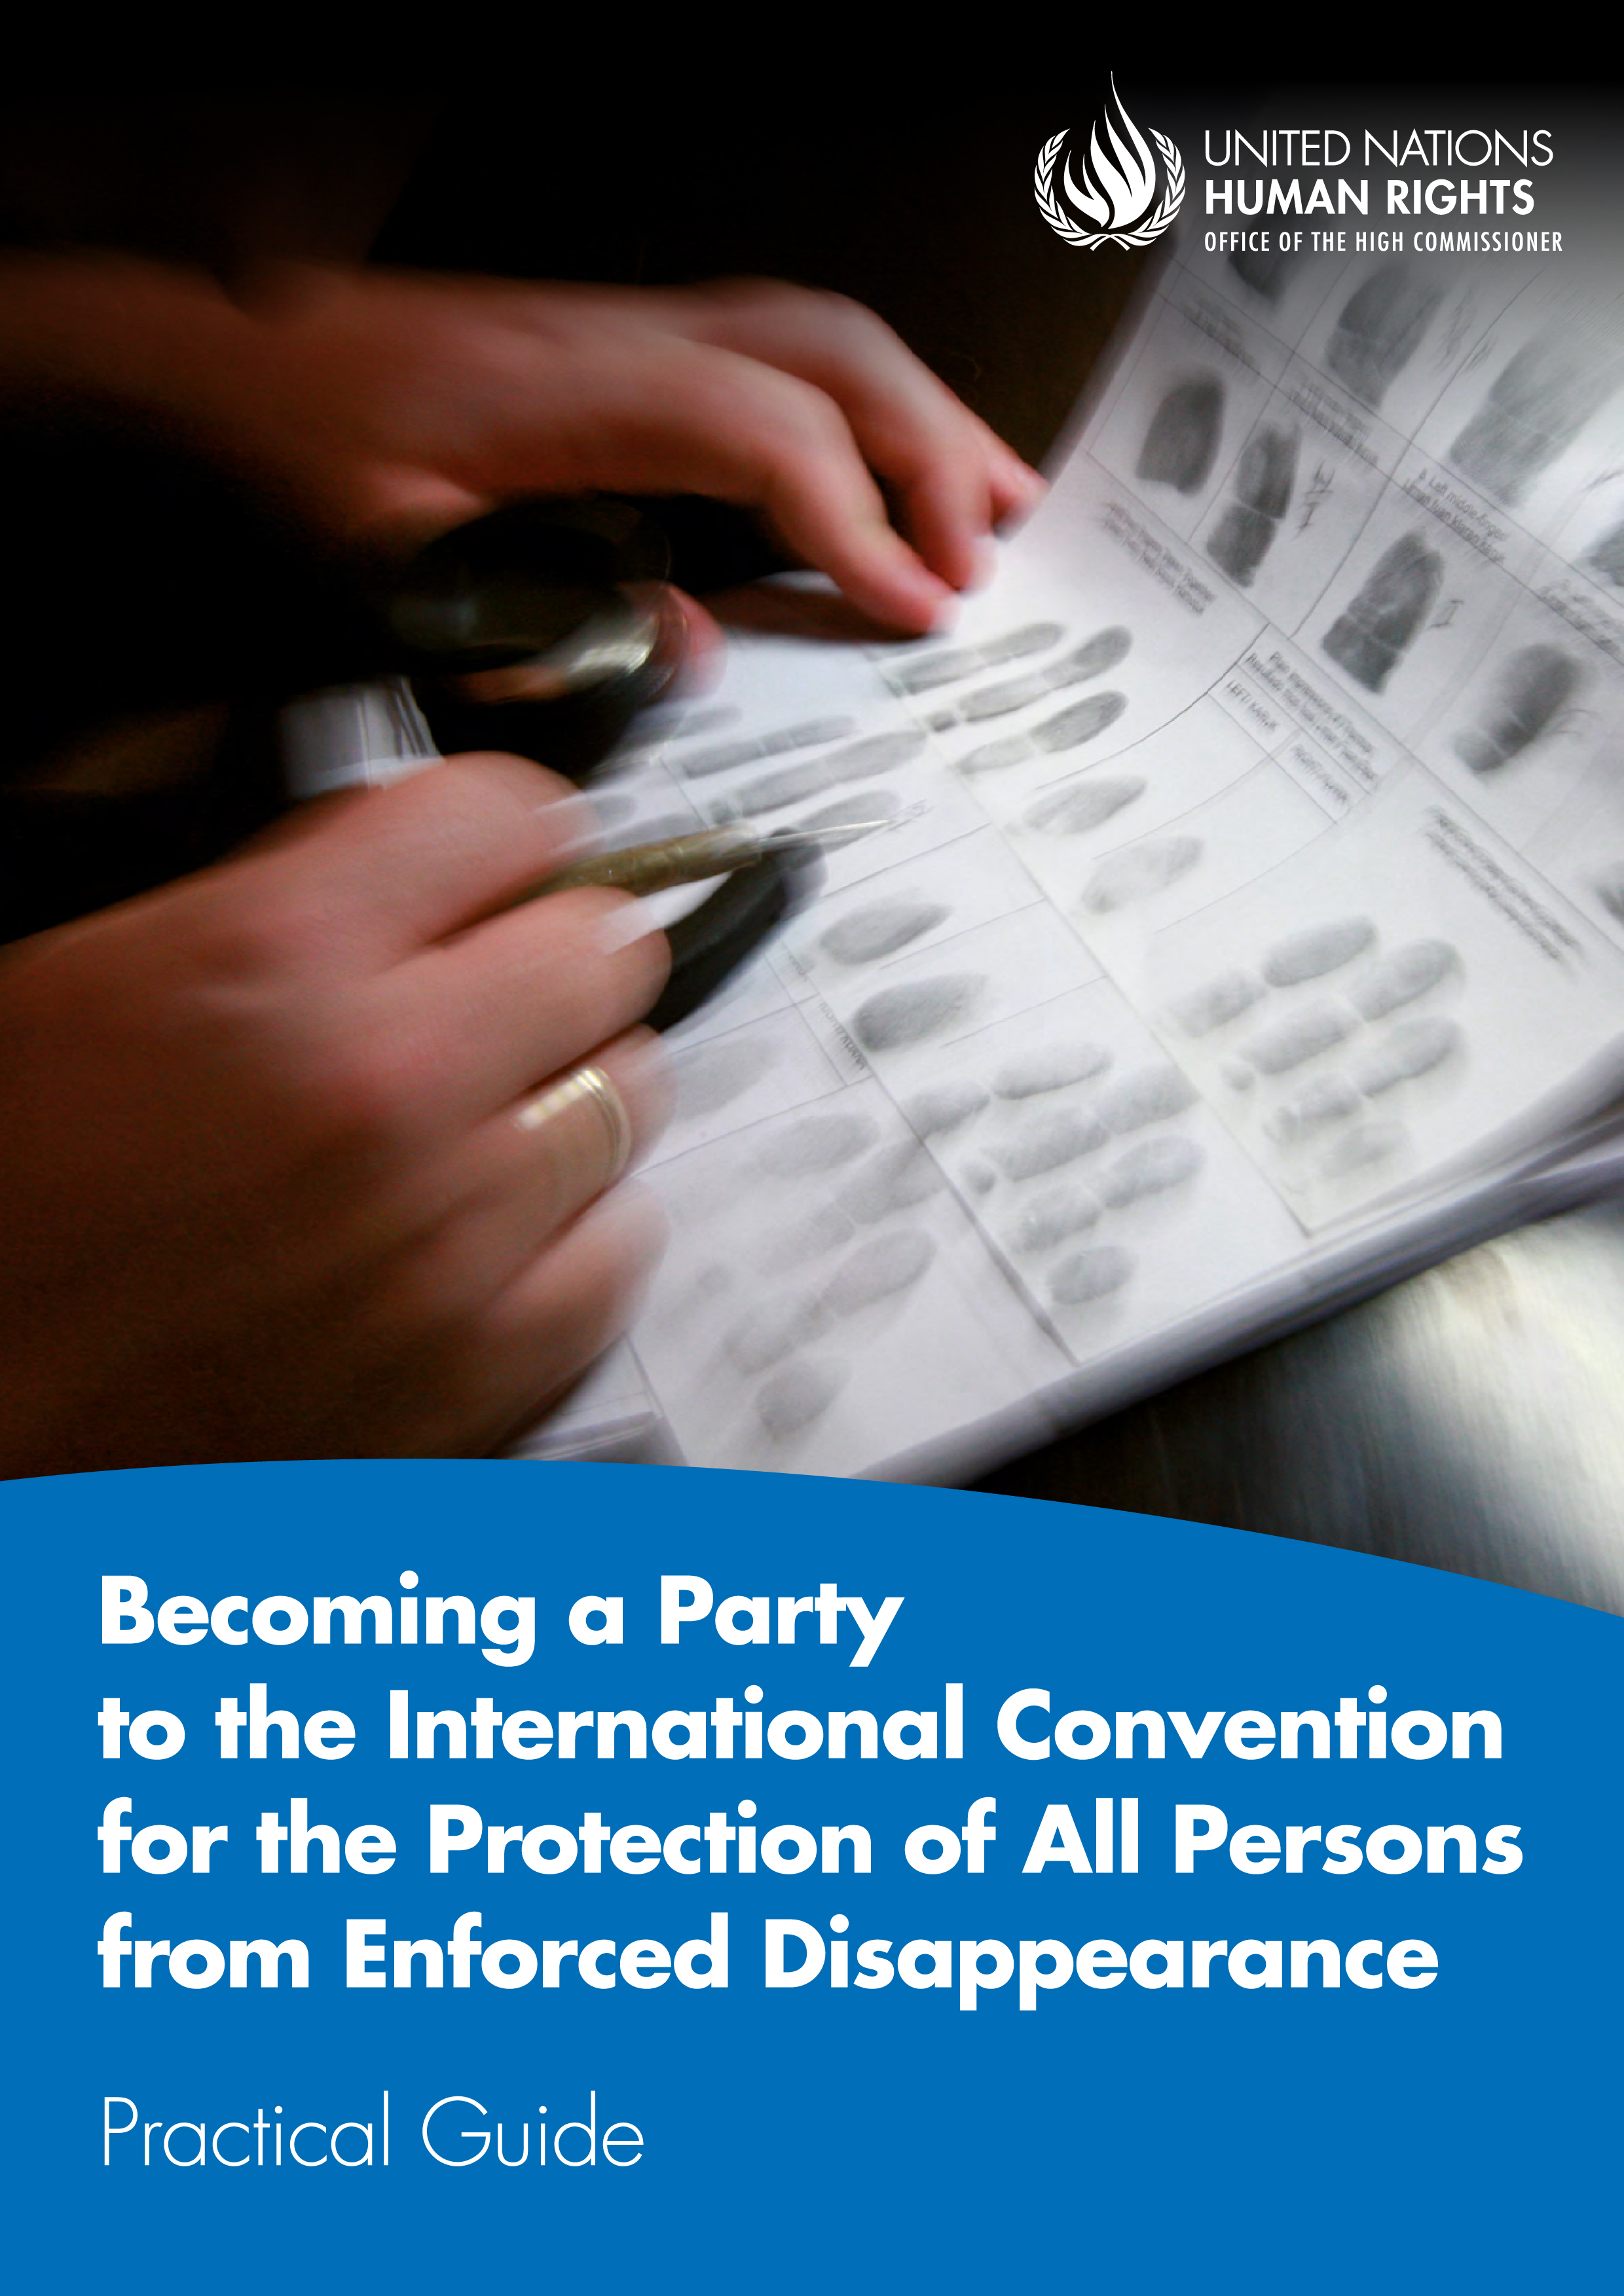 image of Becoming a Party to the International Convention for the Protection of All Persons from Enforced Disappearance